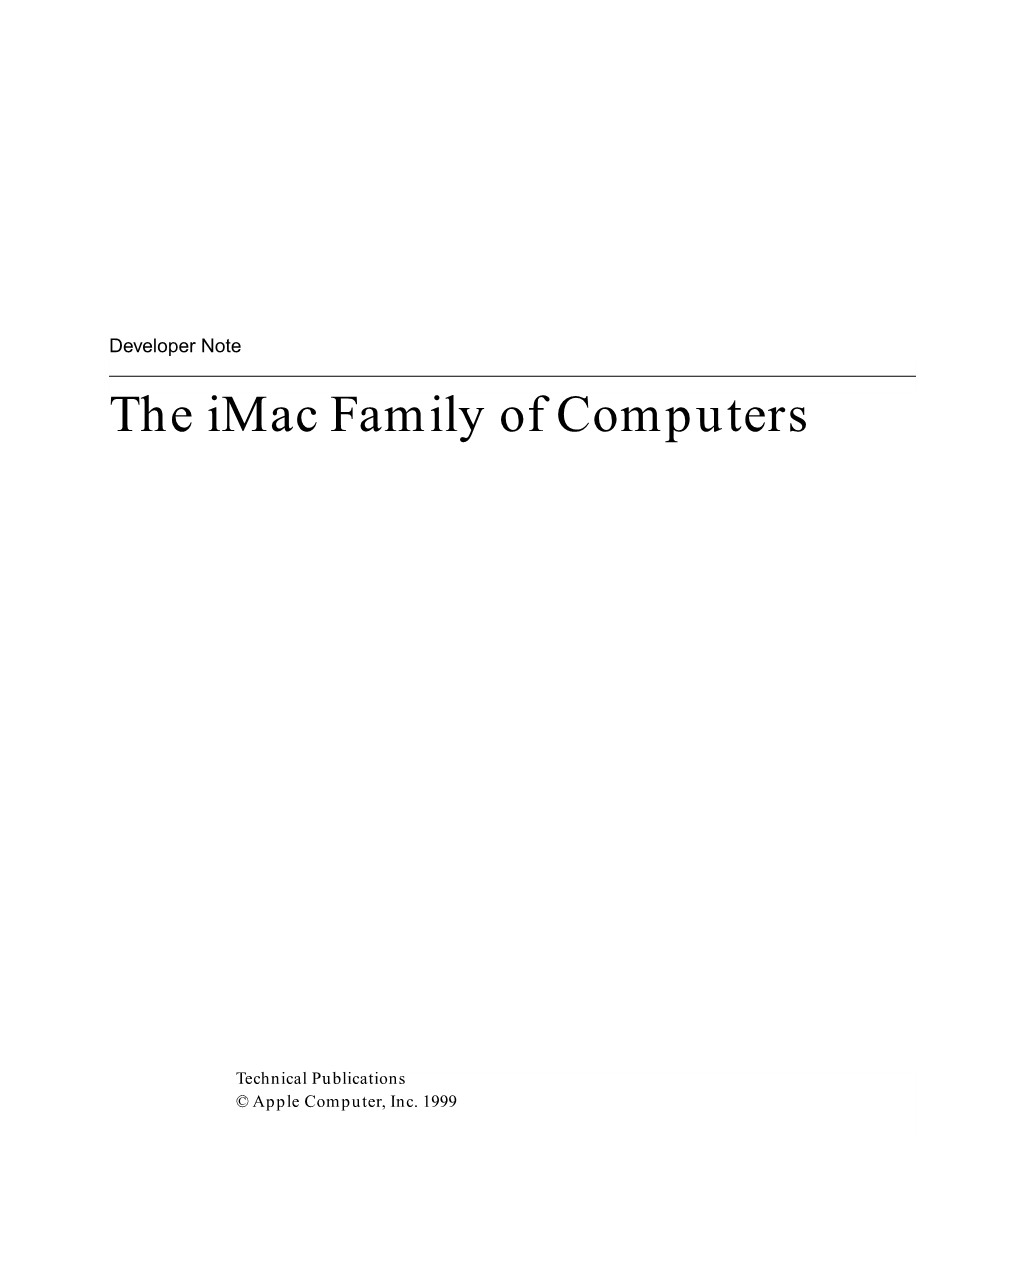 The Imac Family of Computers